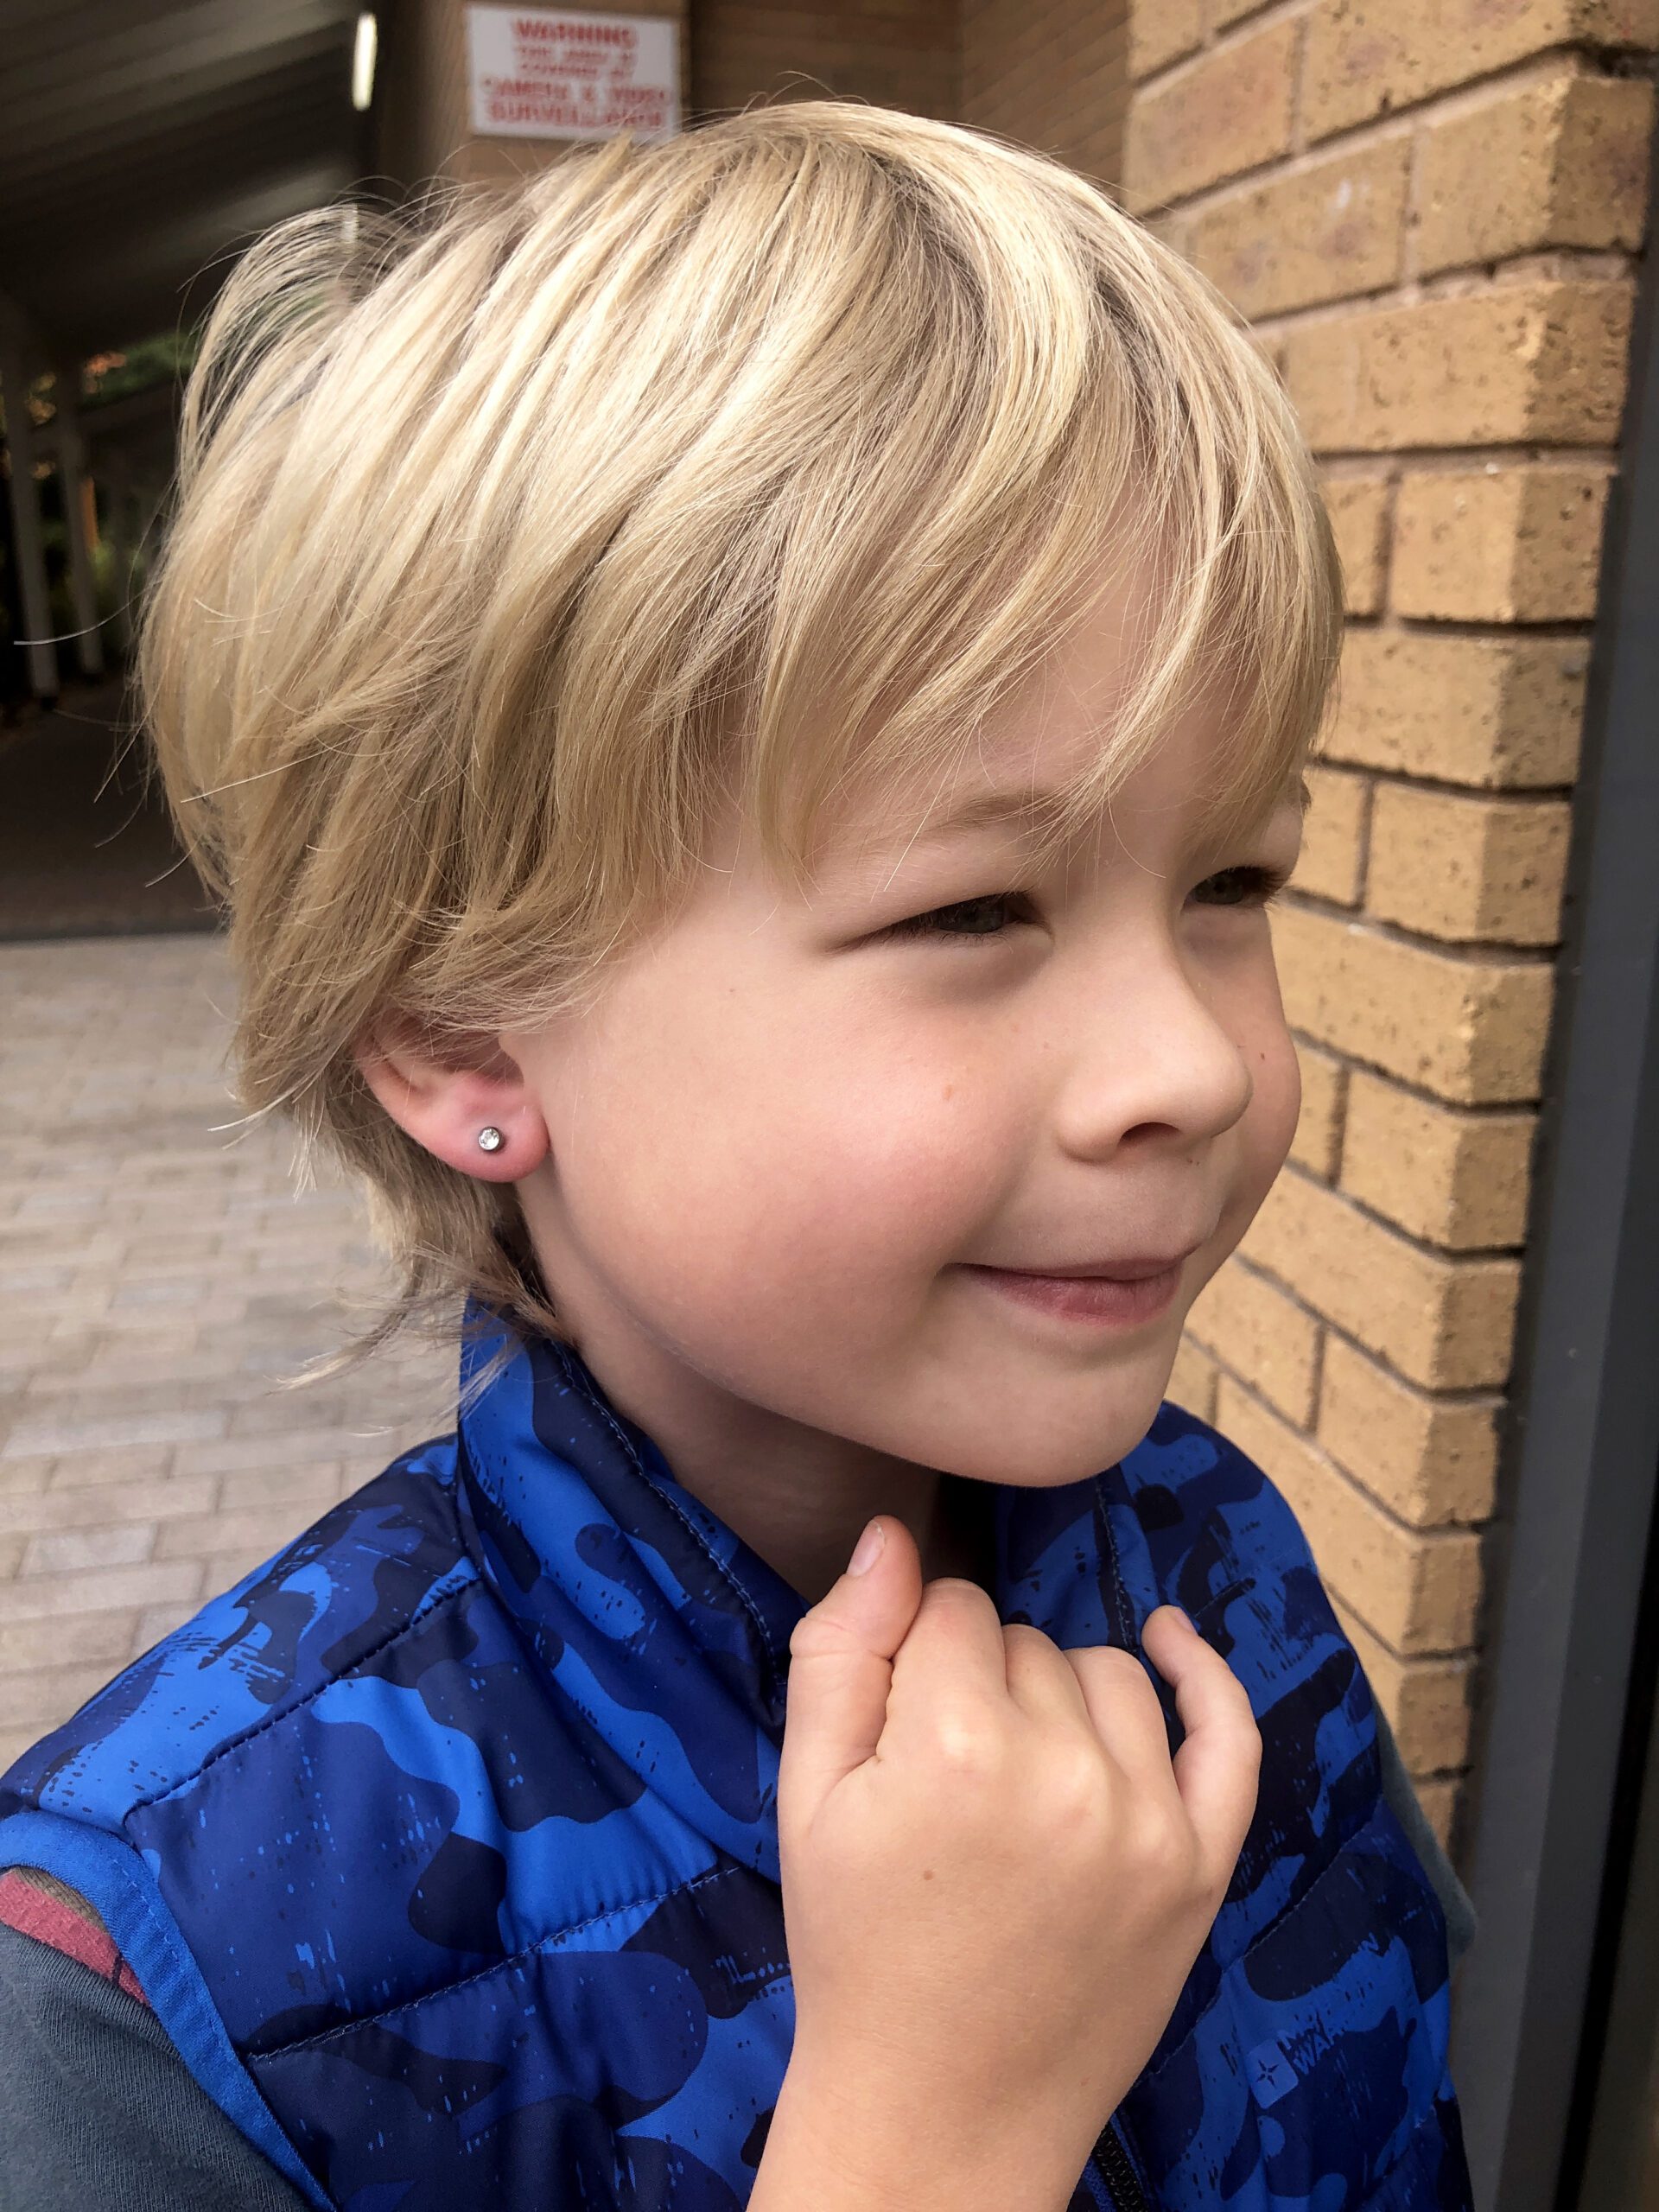 Should Boys Have Their Ears Pierced? - Laura Summers